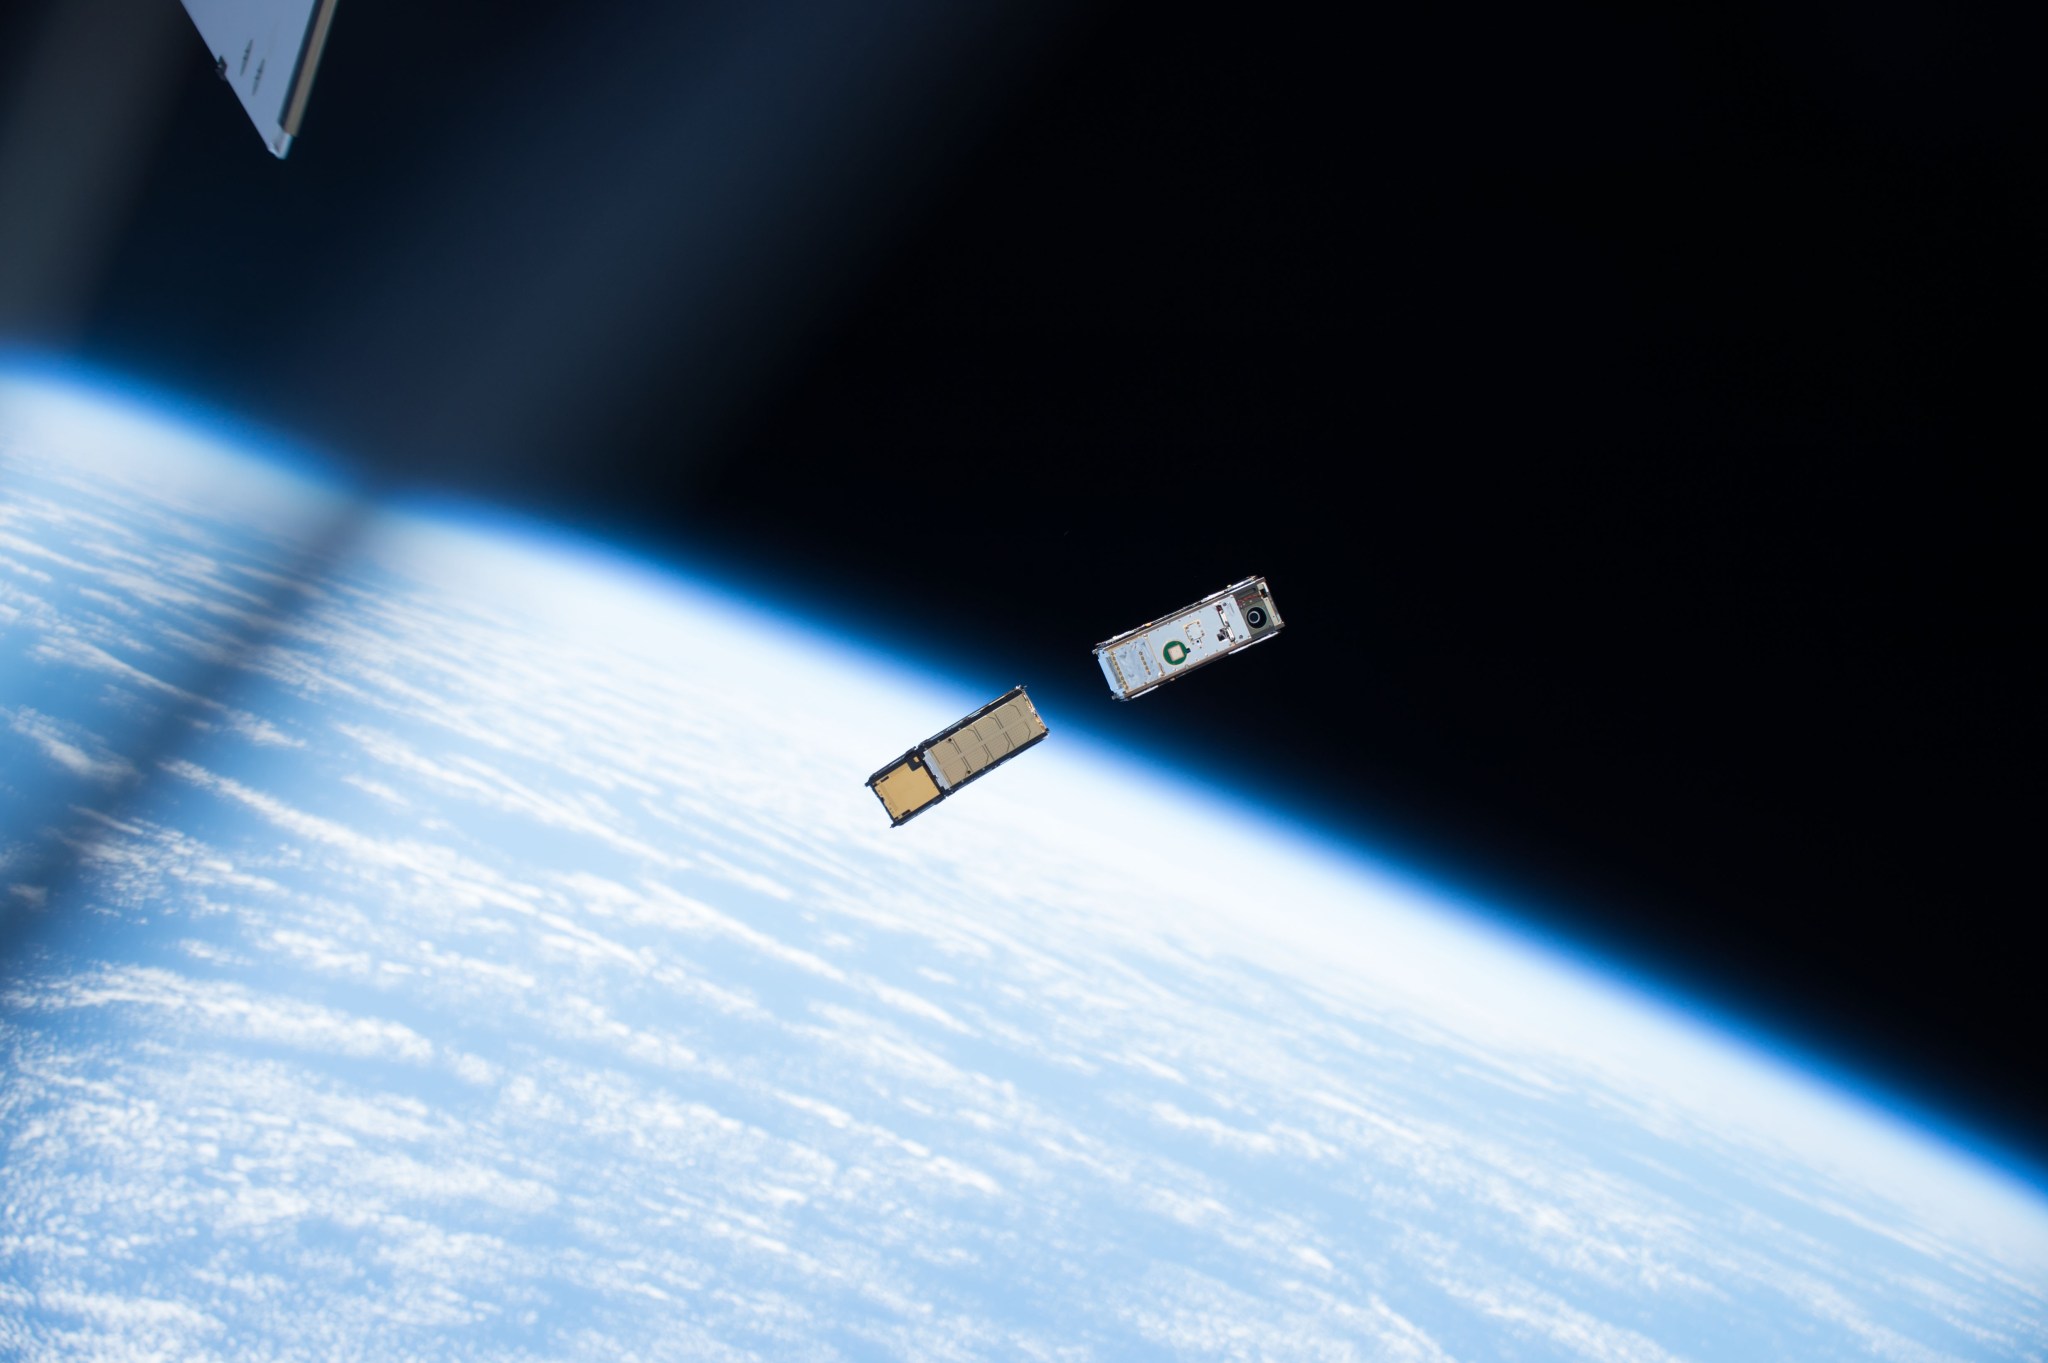 CubeSats as they were deployed from the International Space Station